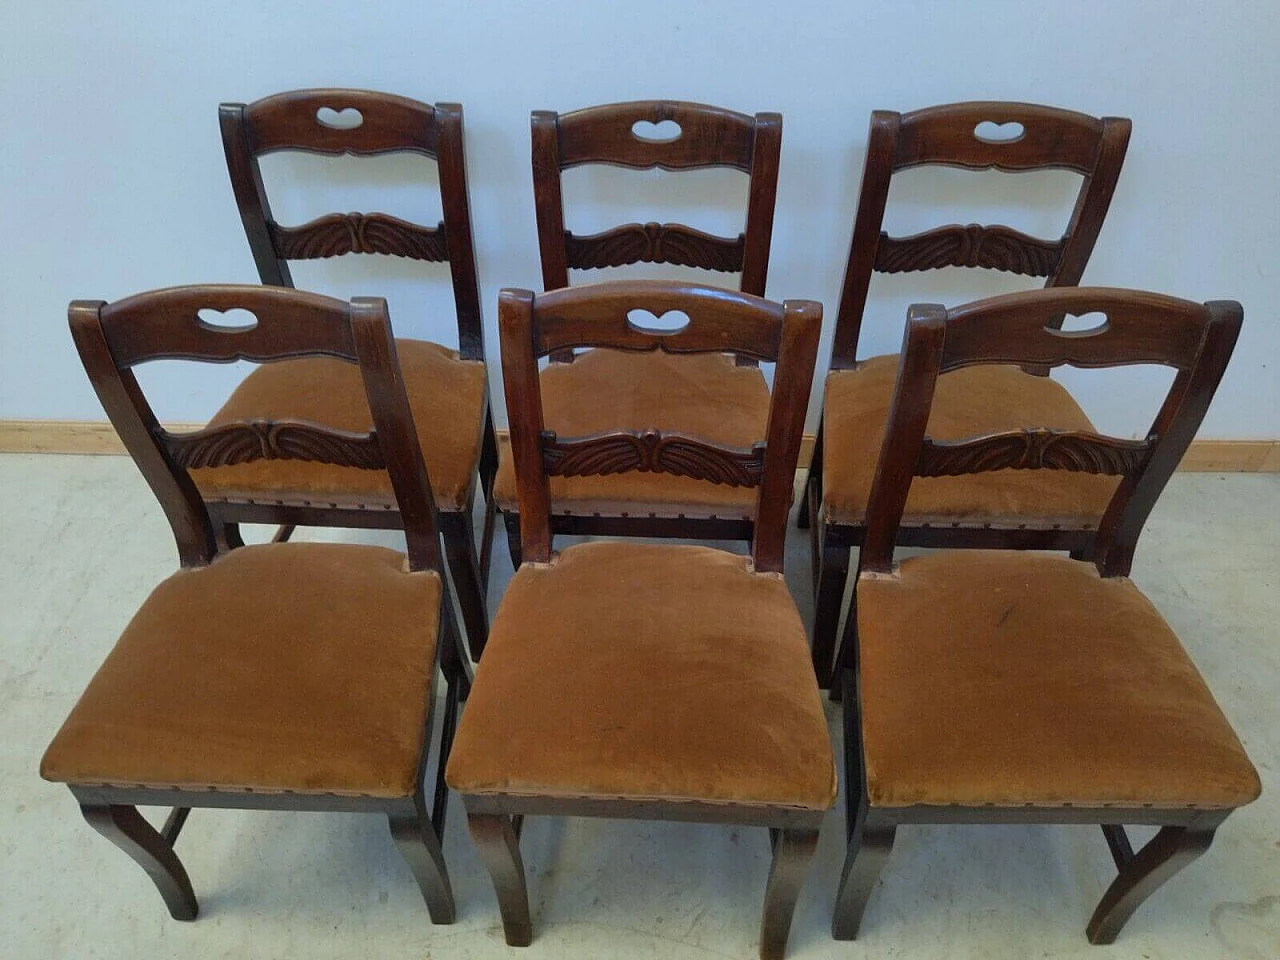 6 Empire-style walnut chairs, early 19th century 11